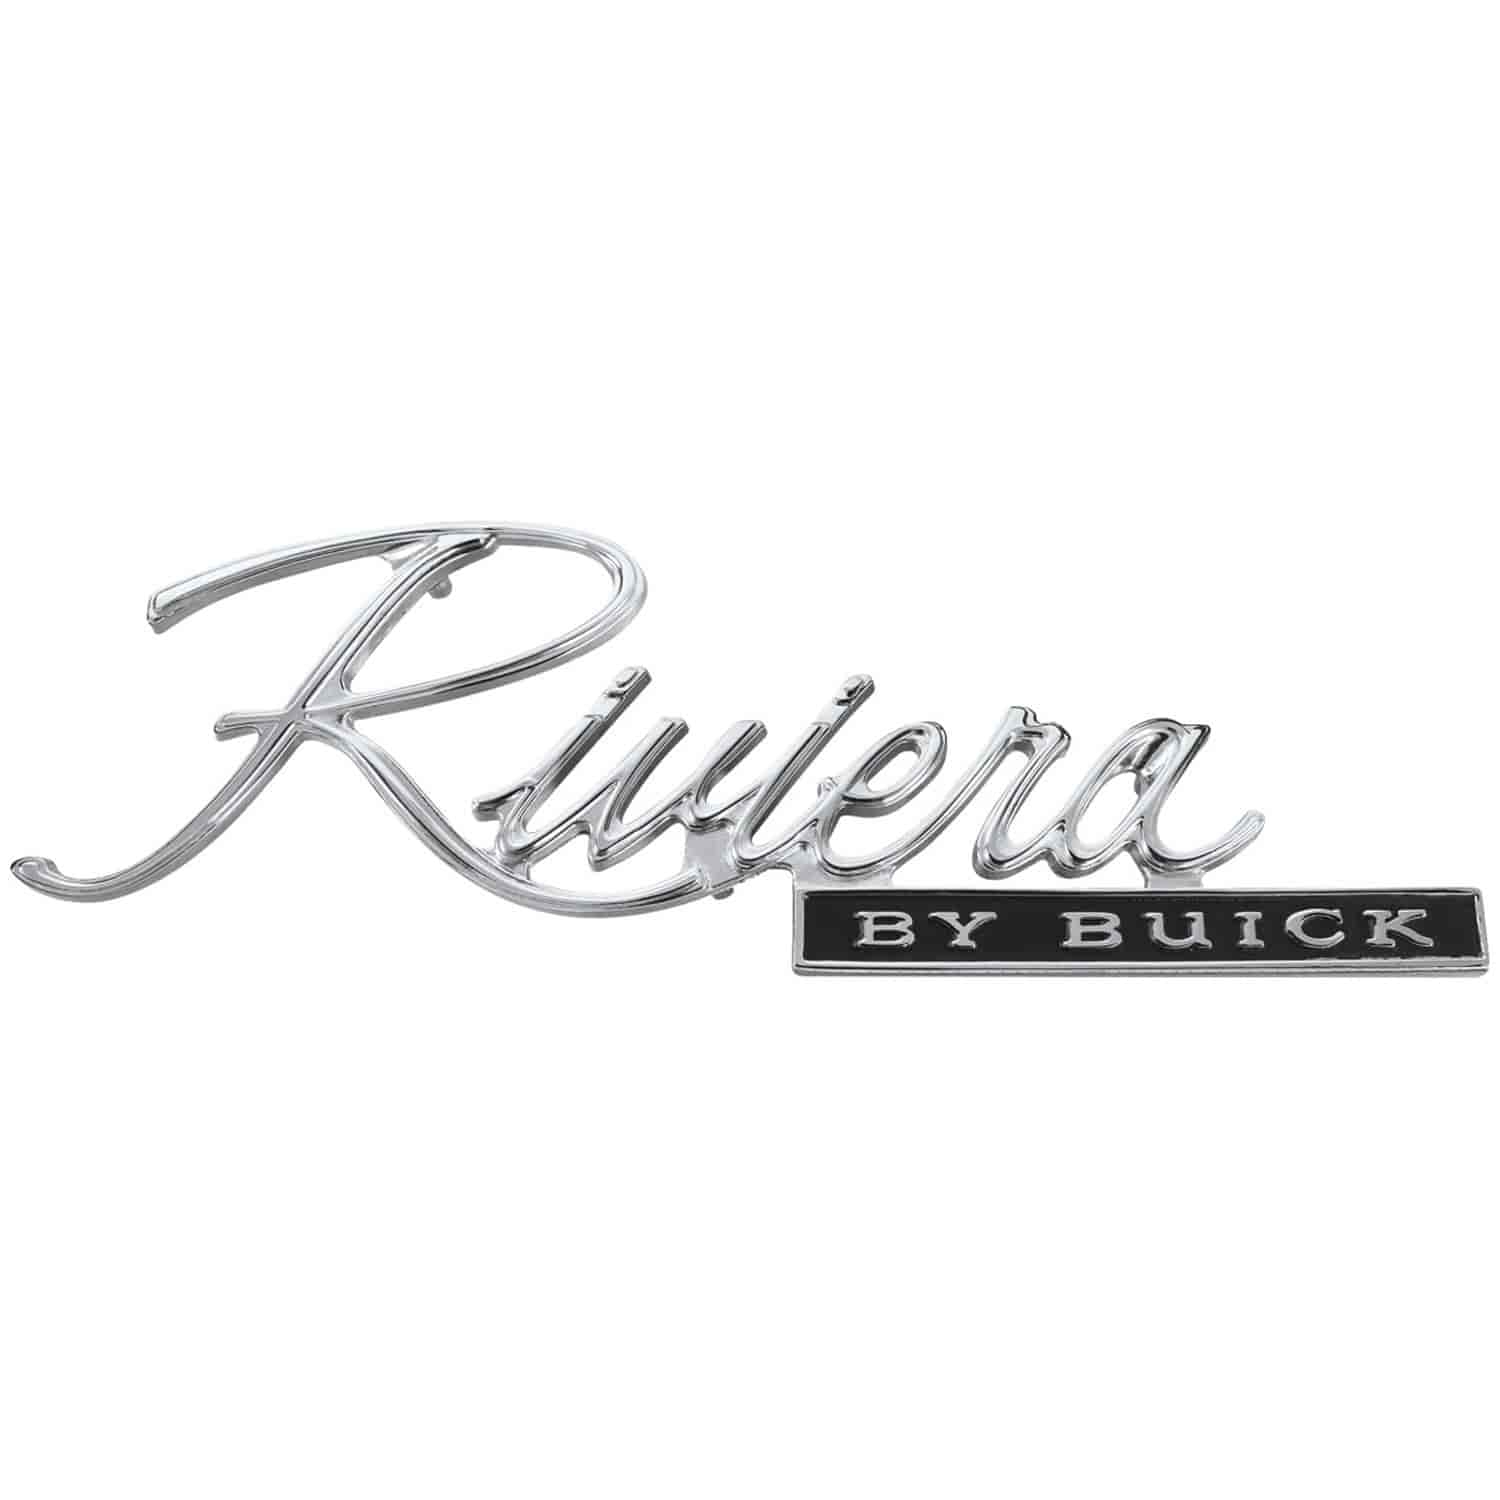 Emblem Trunk 1971-72 Riviera by Buick